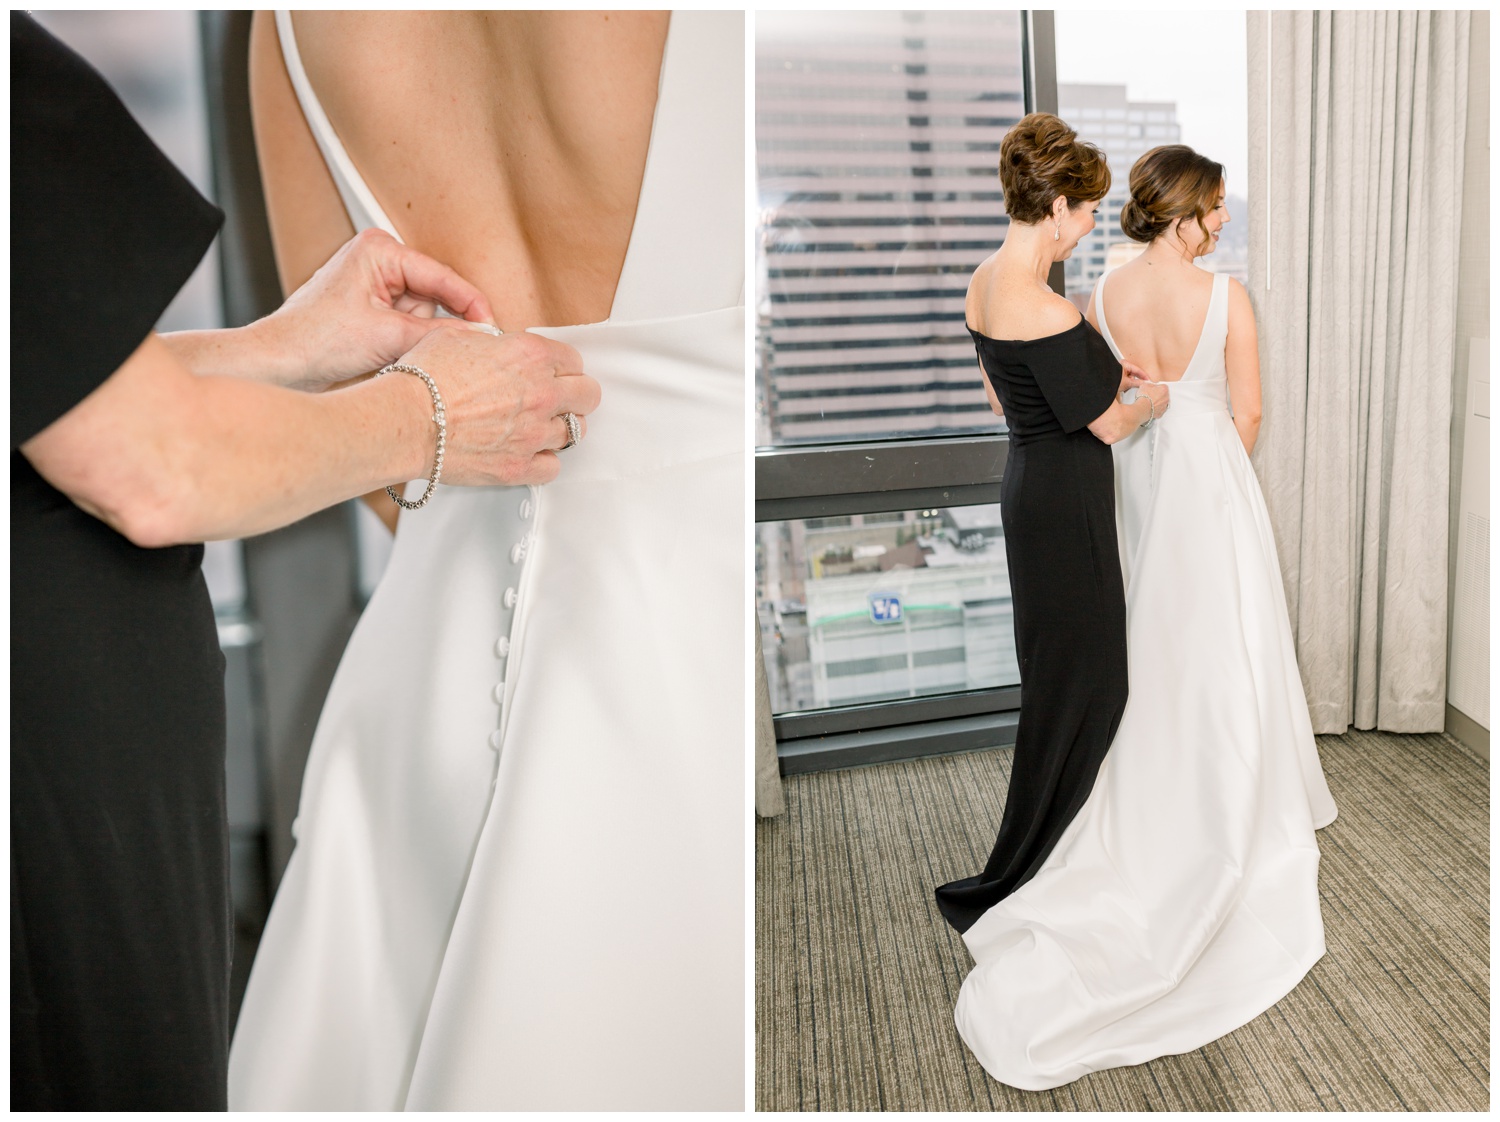 Bride Getting Into Dress - Mother of the Bride - Wedding Dress with Buttons